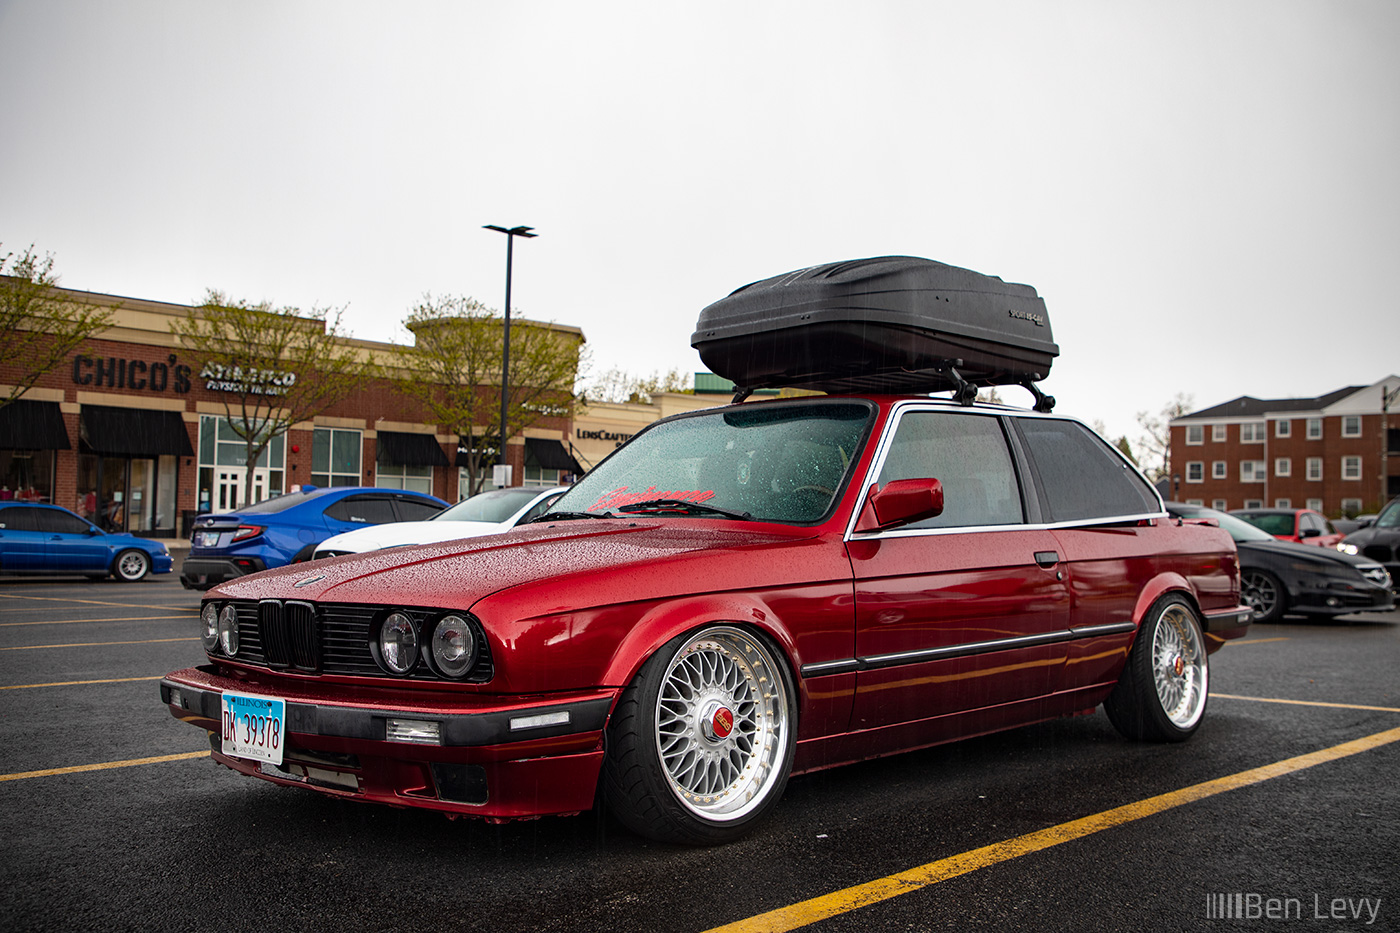 E30 BMW with Rooftop Cargo Carrier